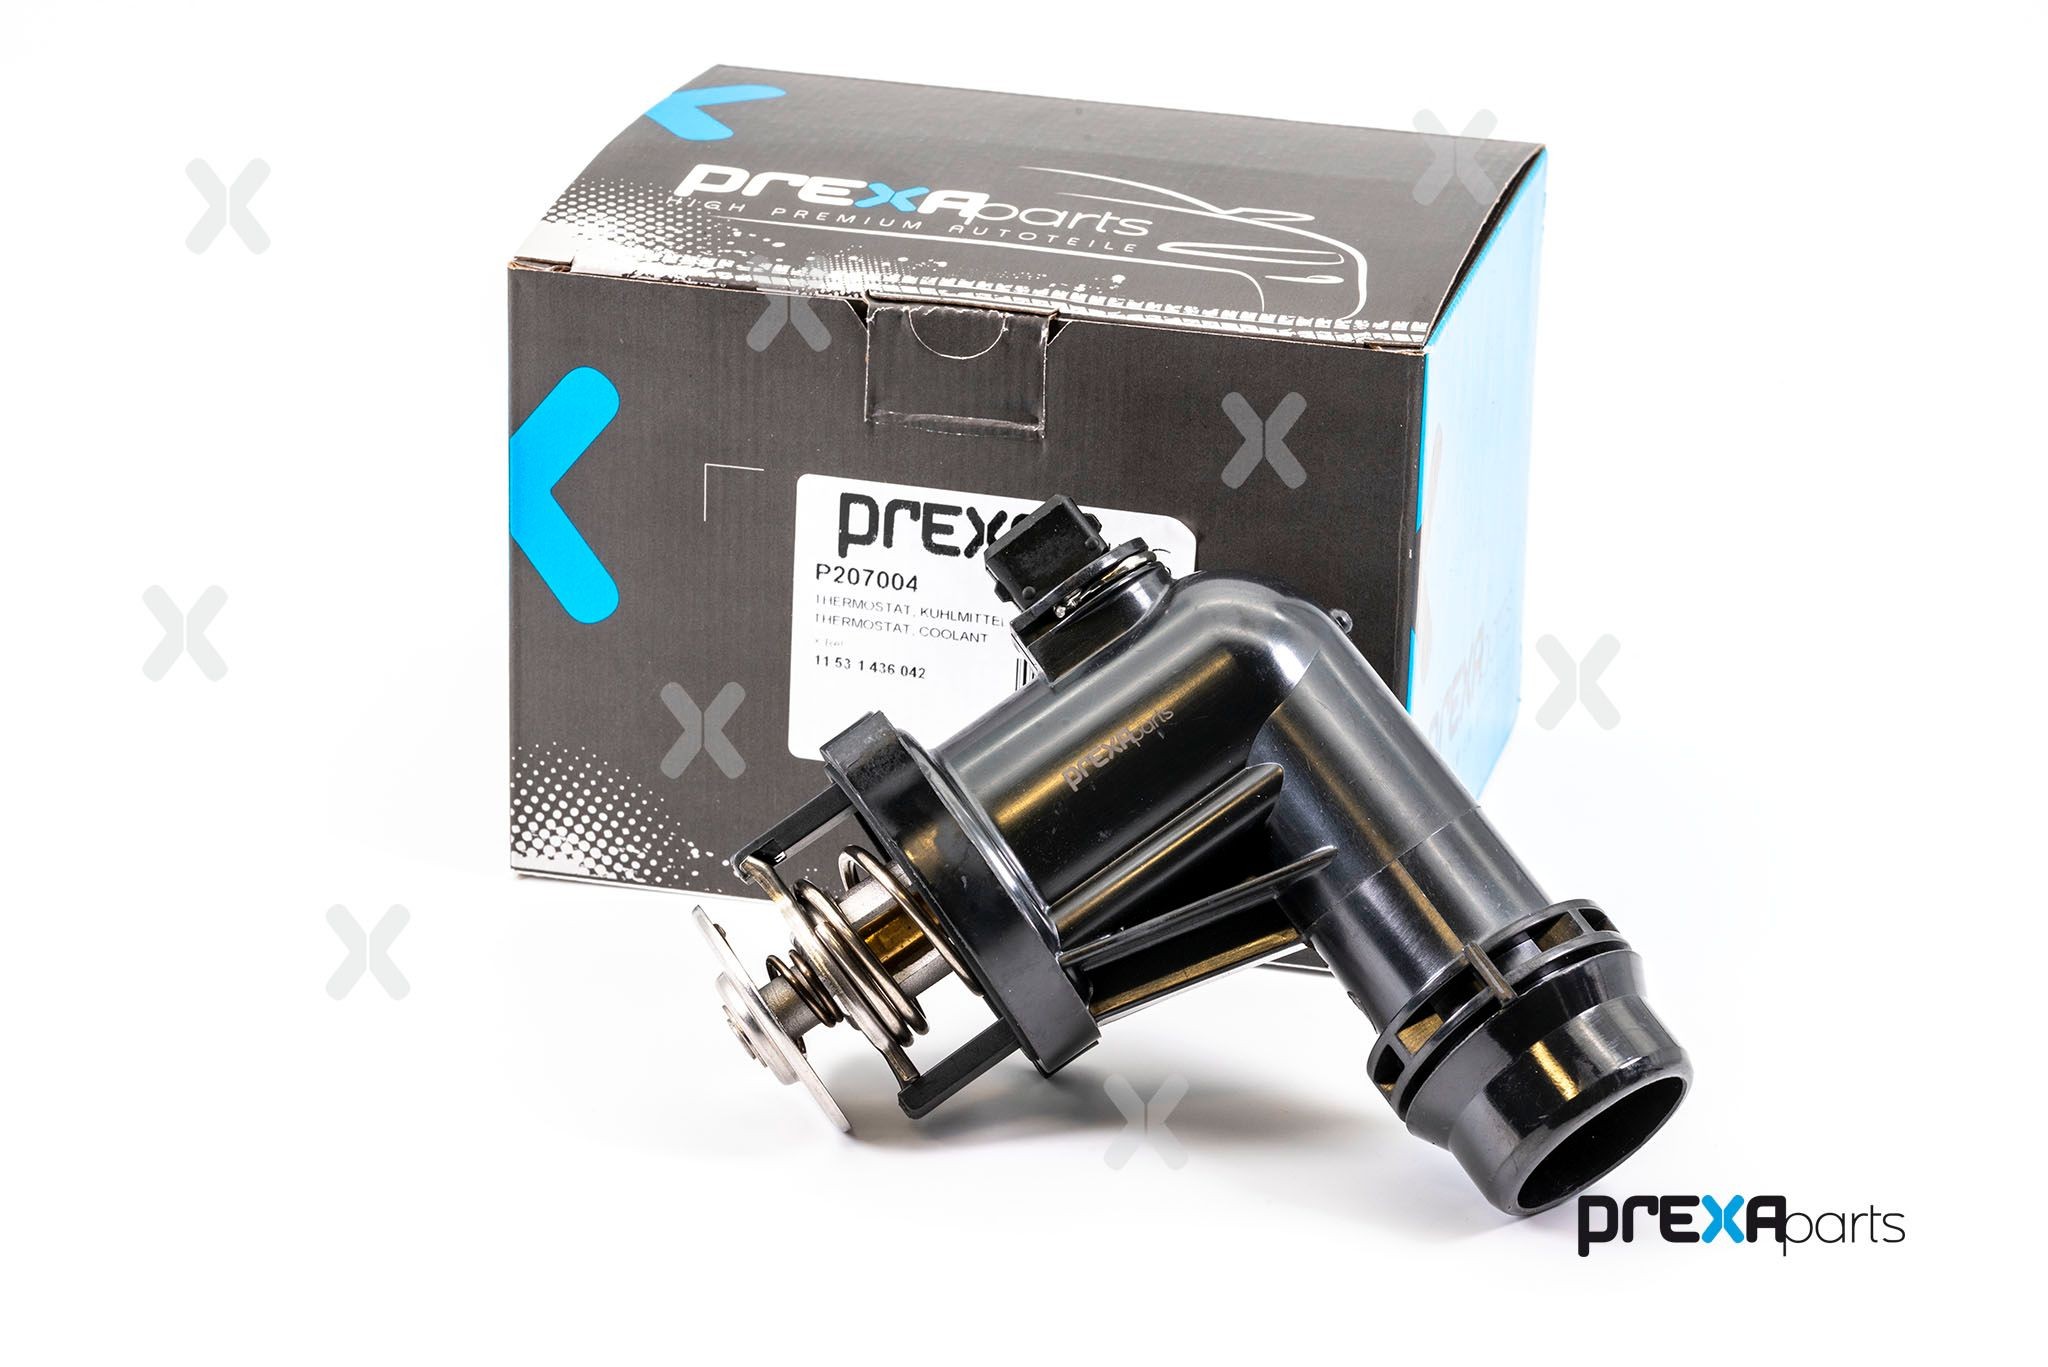 Engine thermostat P207004 from PREXAparts